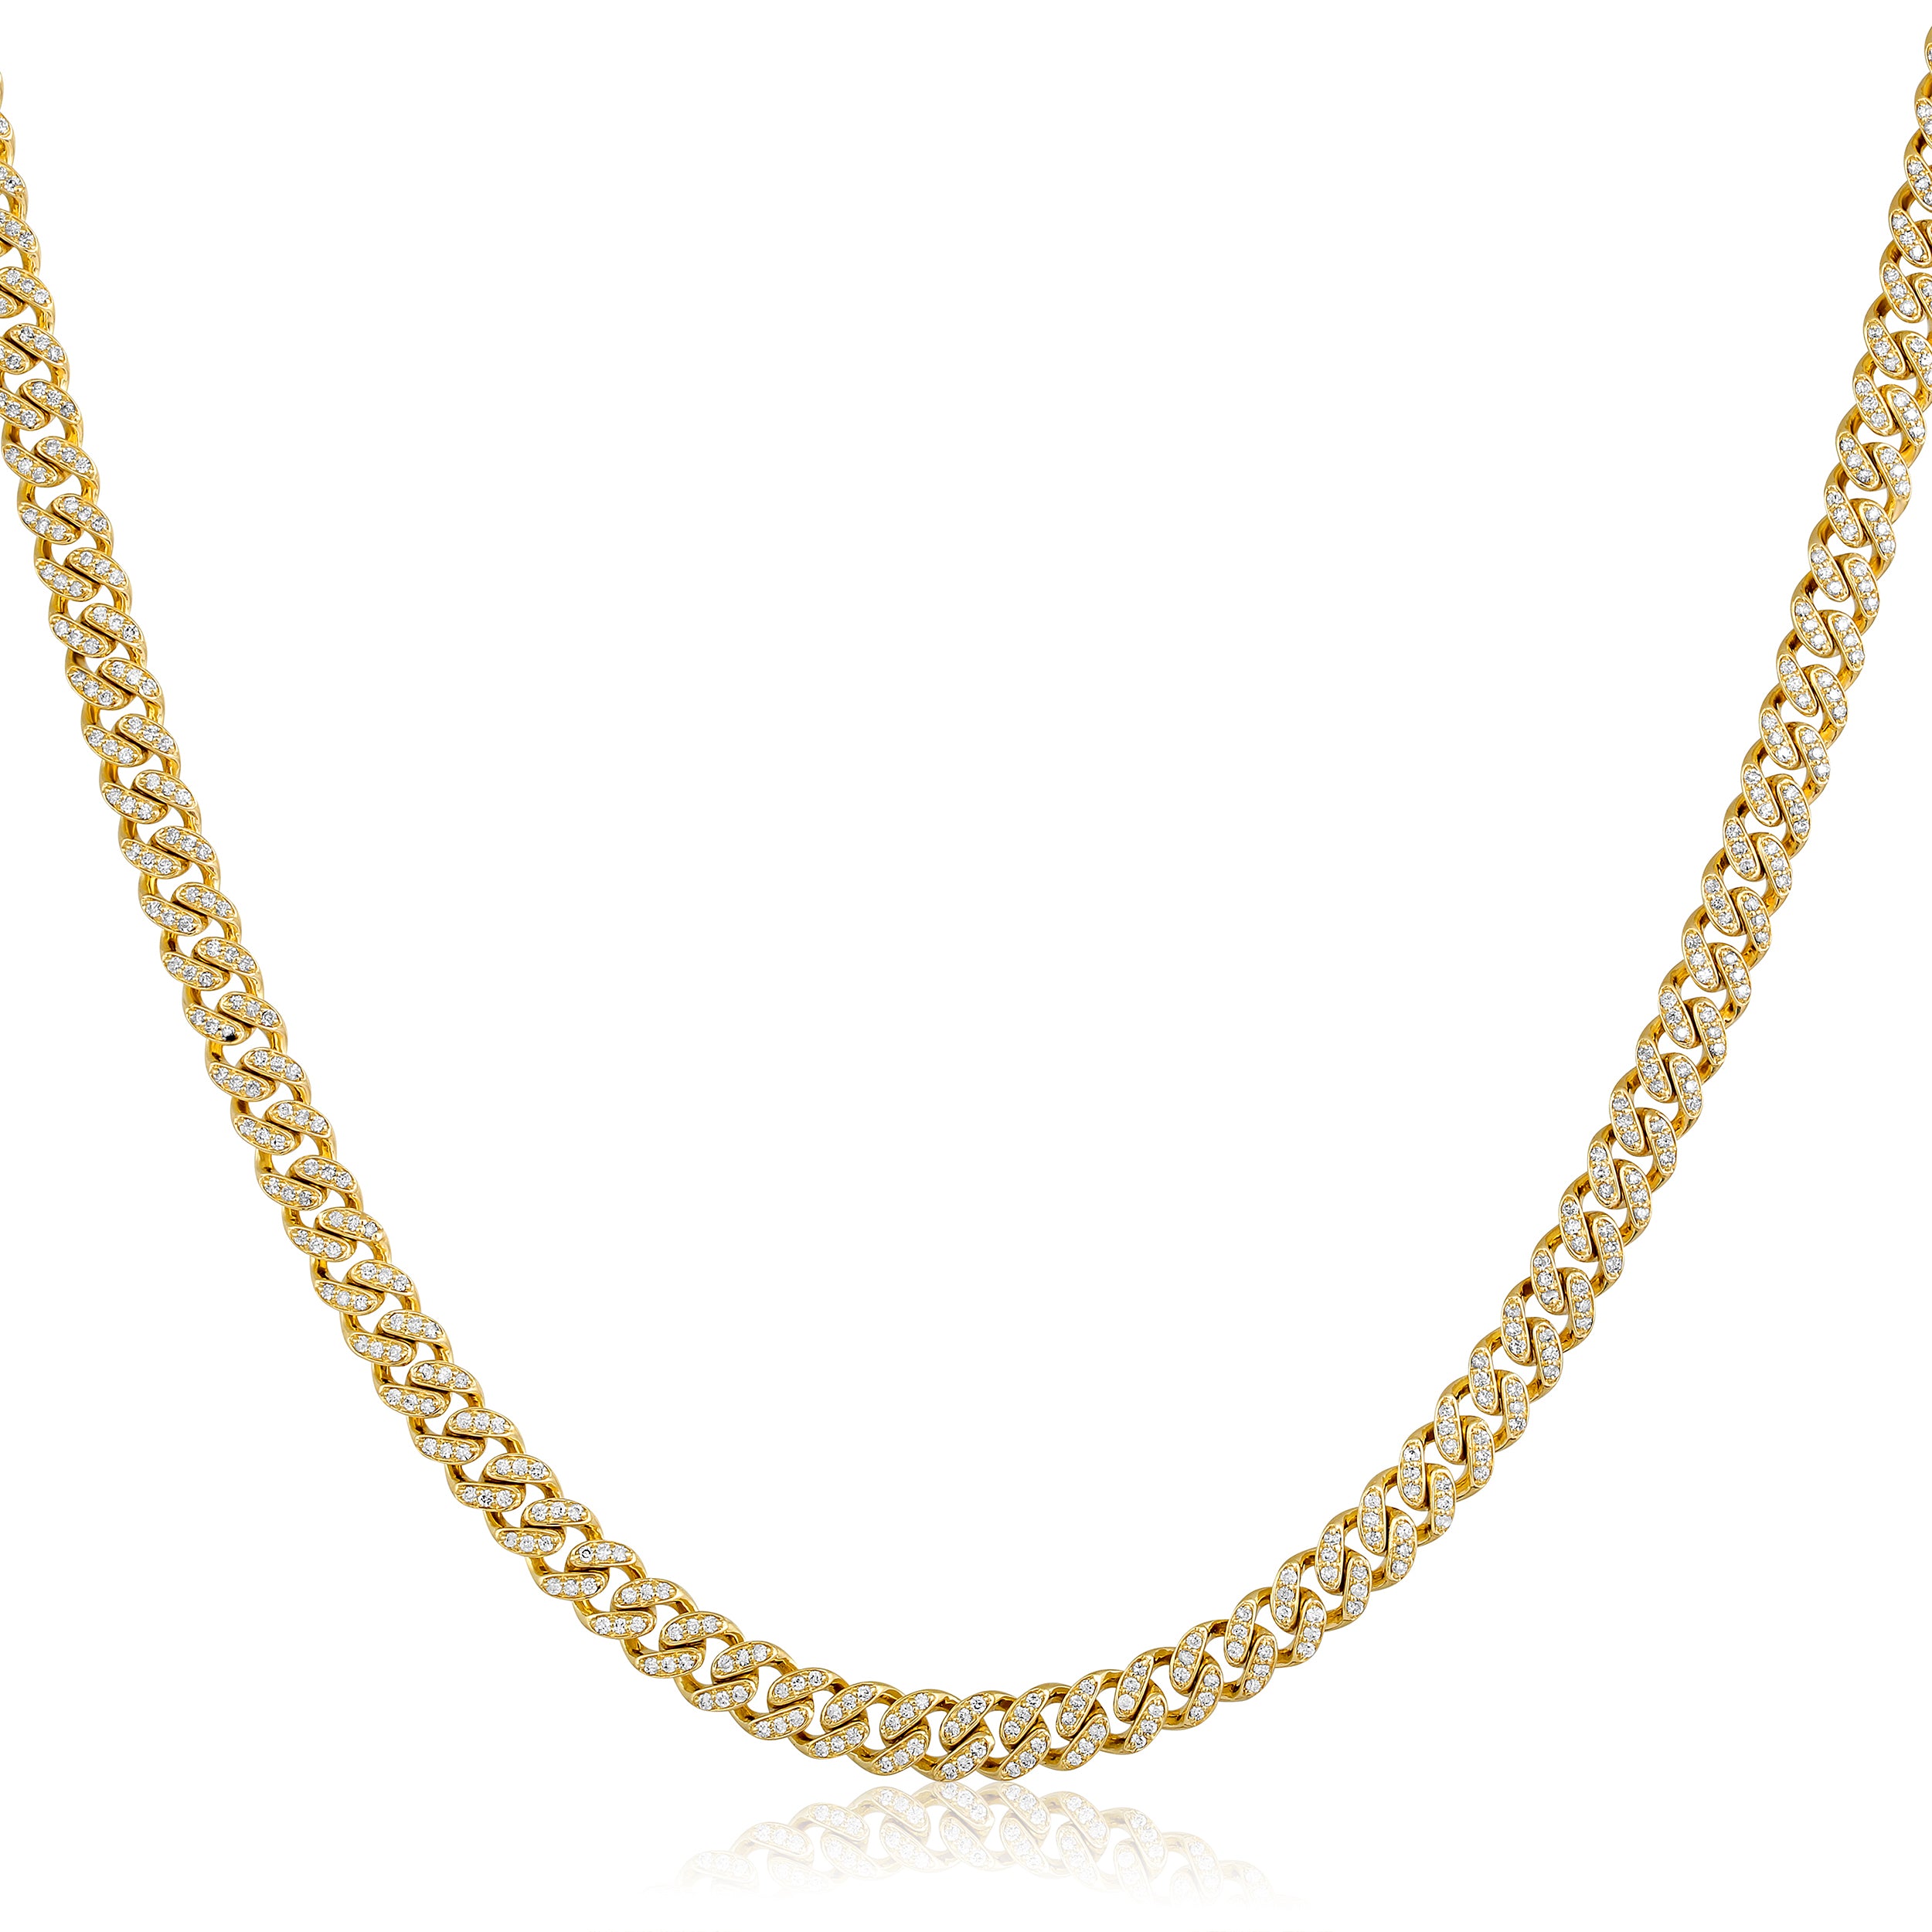 Certified 10K Gold 1.8ct Natural Diamond F-I1 4.2mm Cuban Chain Link Yellow Necklace